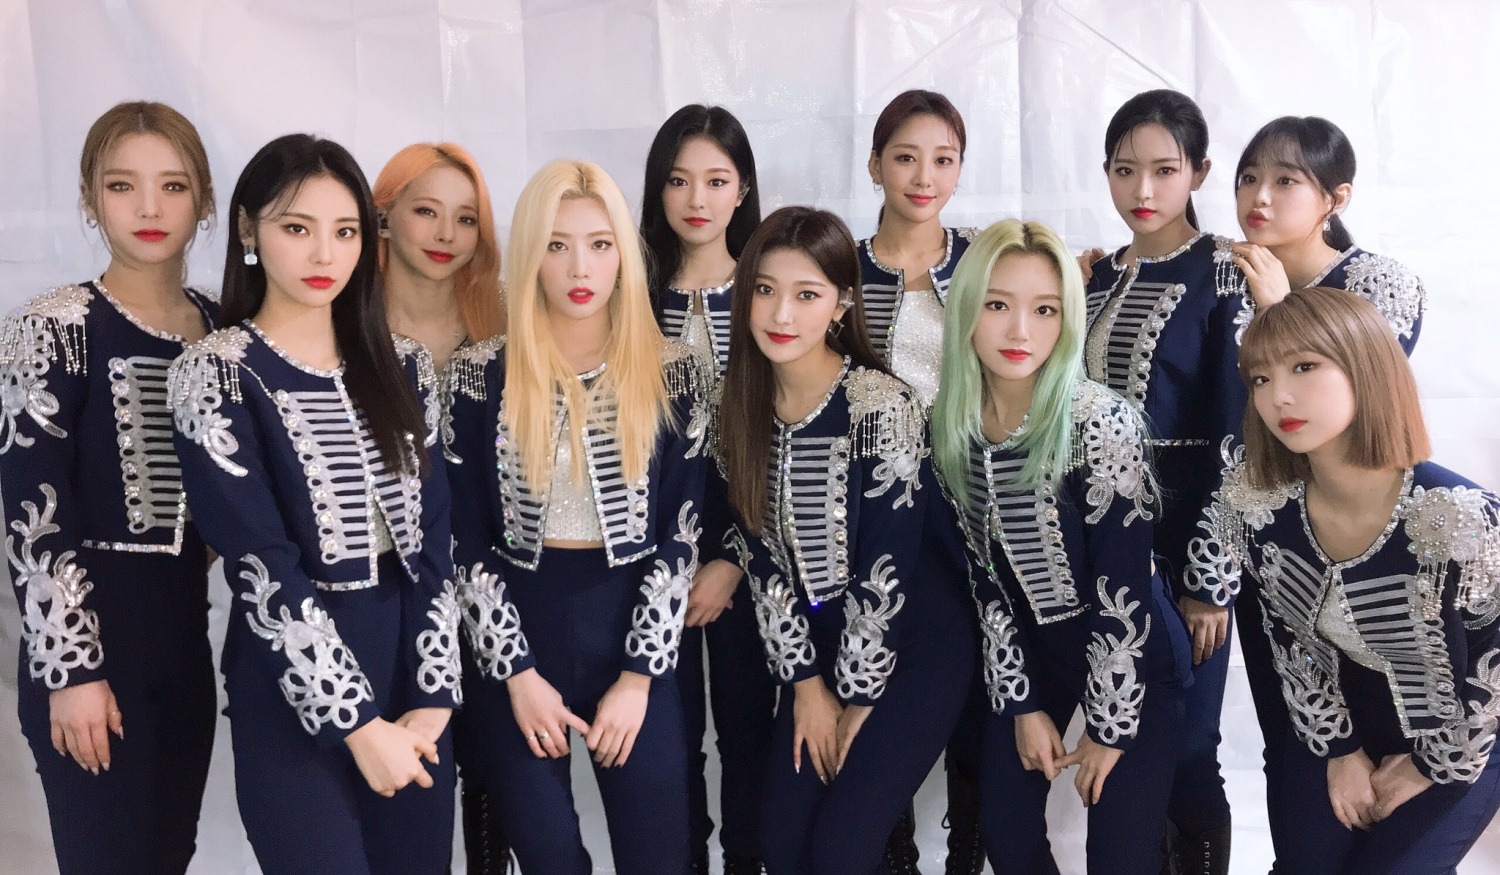 LOONA 'Star' enters top 30 North American radio charts for 6 consecutive weeks